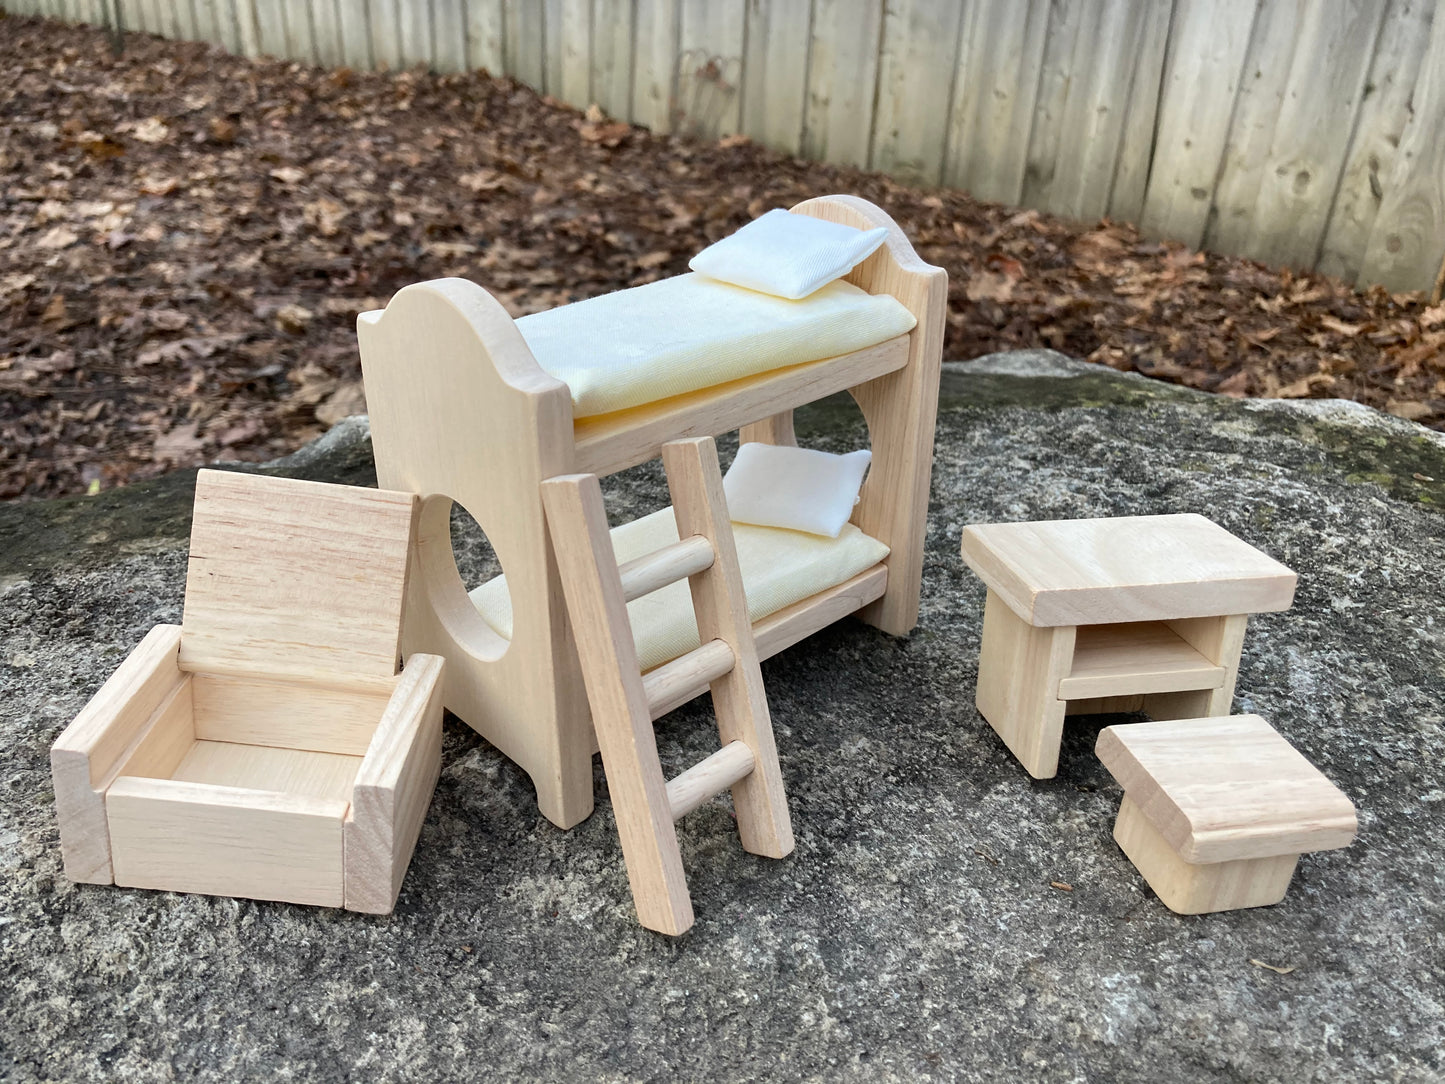 Wooden Dollhouse Furniture - CHILDREN'S BEDROOM, with Bunk Beds!